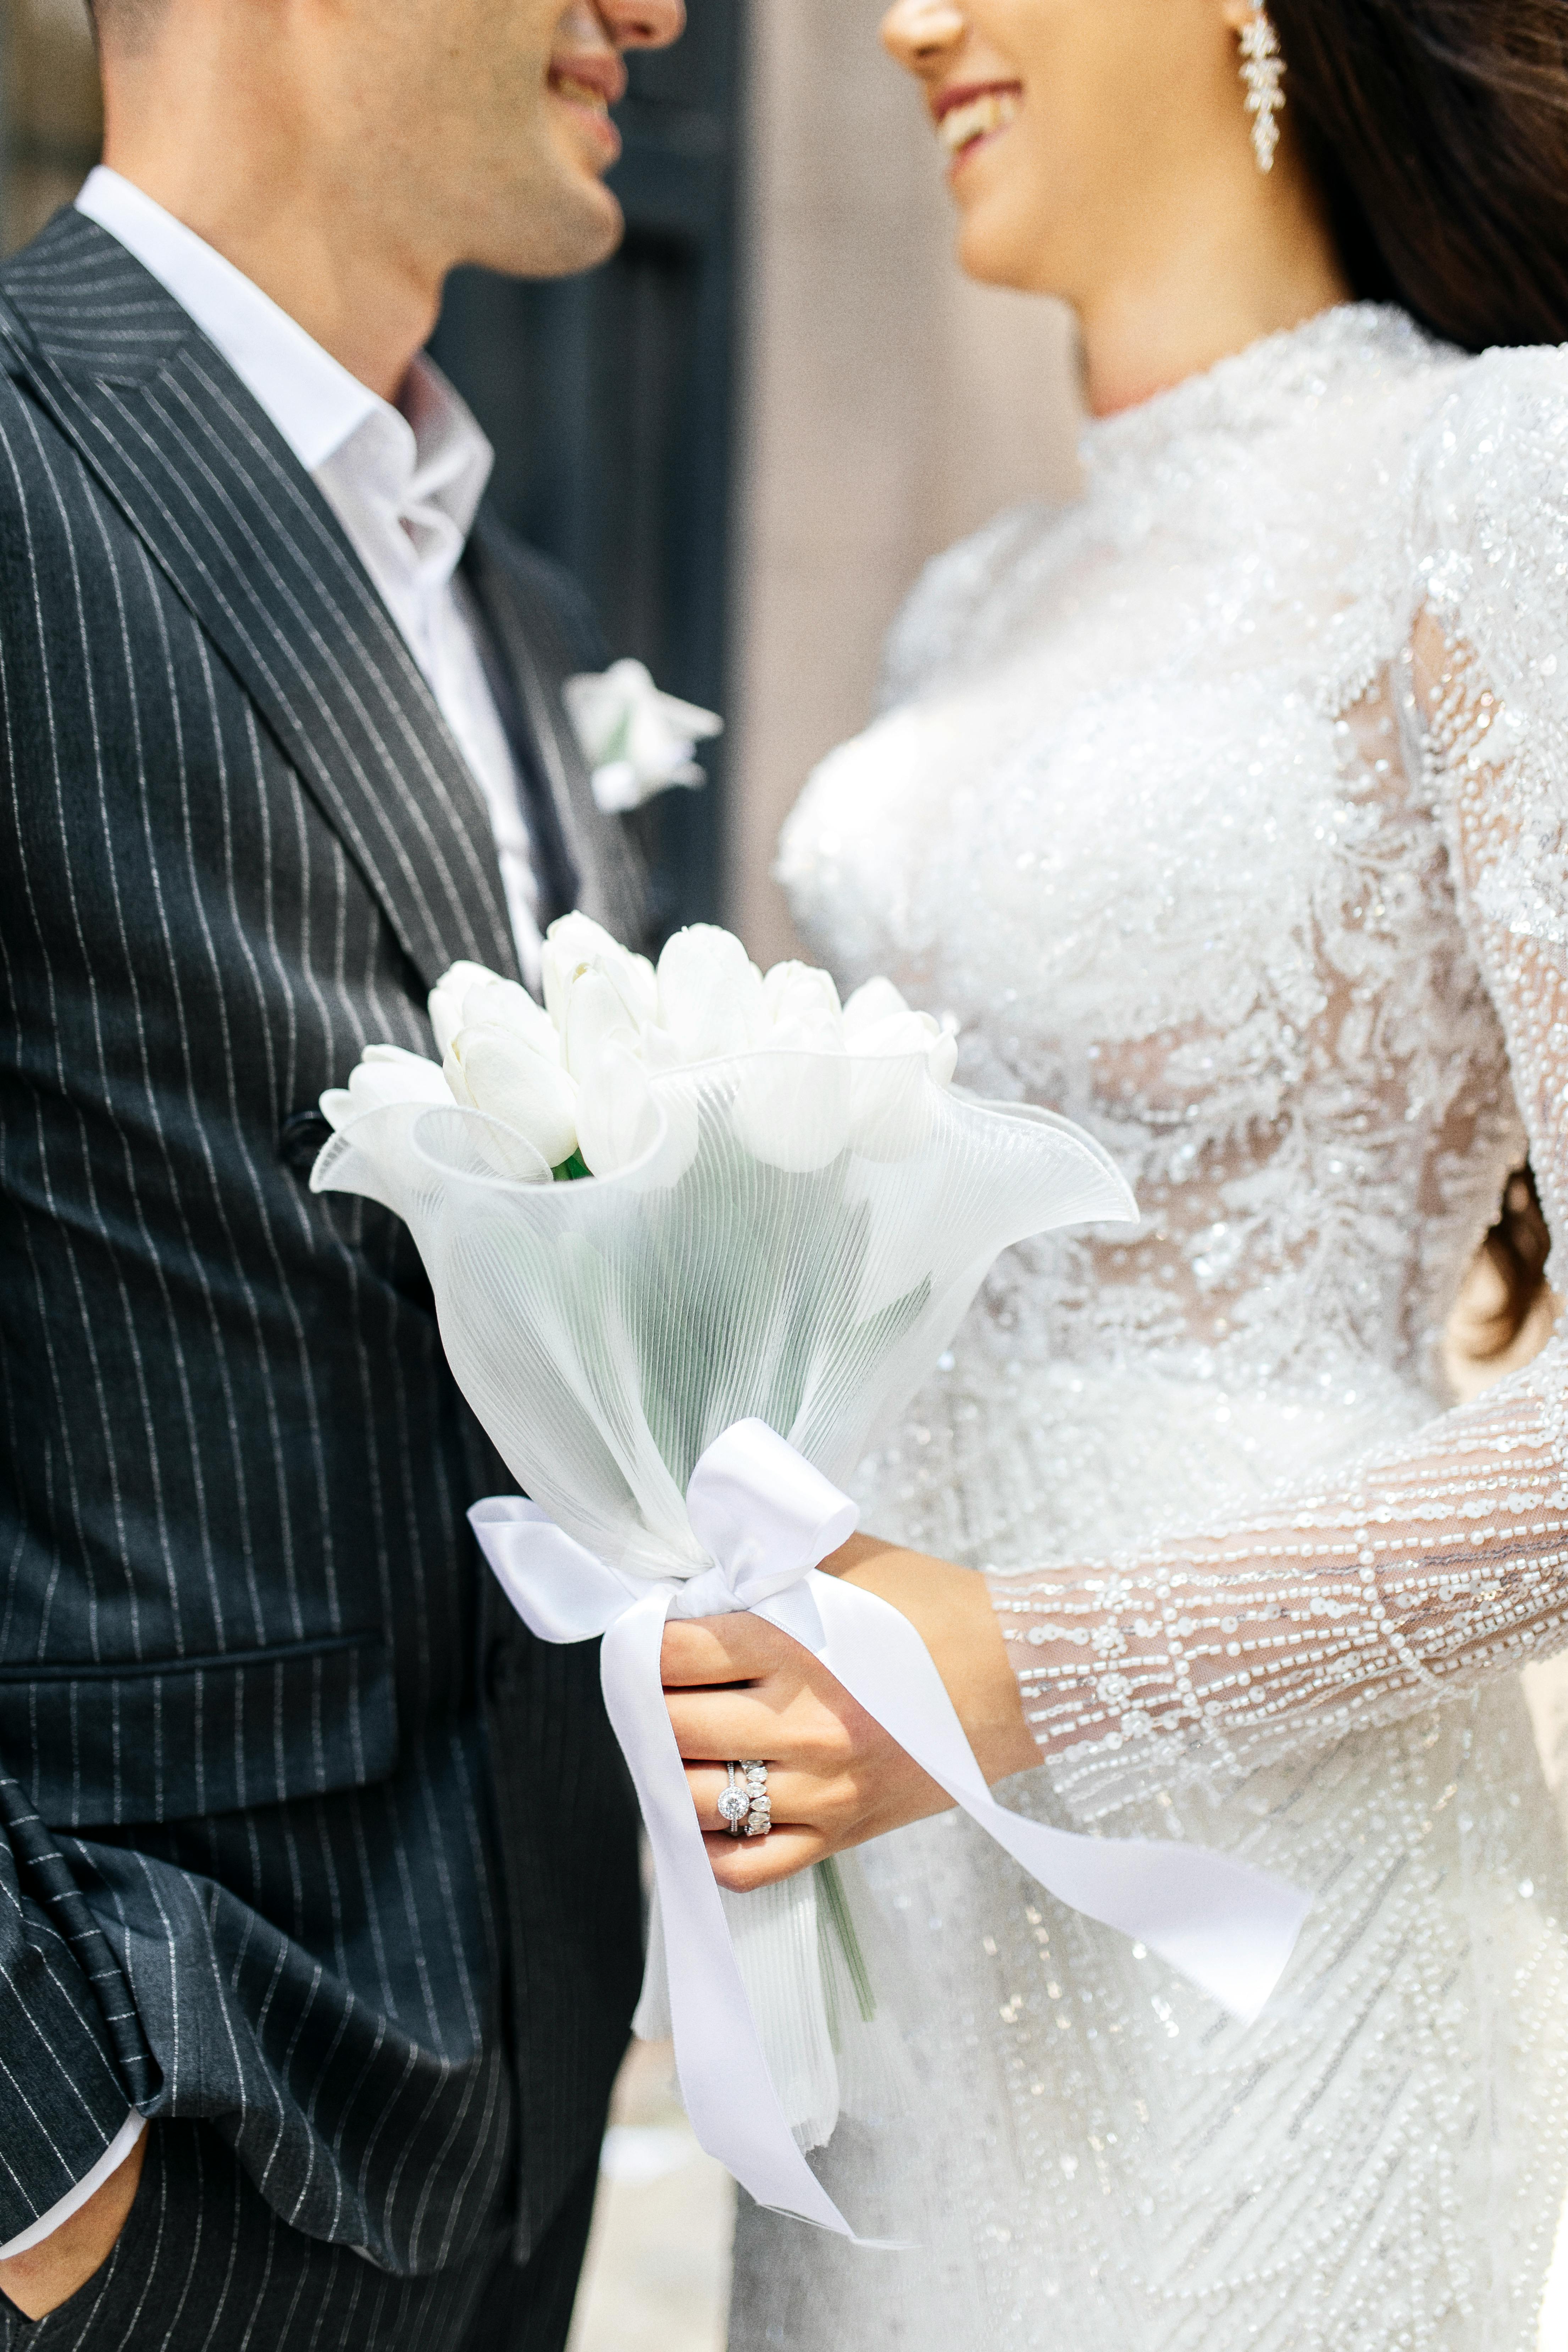 Comprehensive Guide to Destination Wedding Legal Requirements